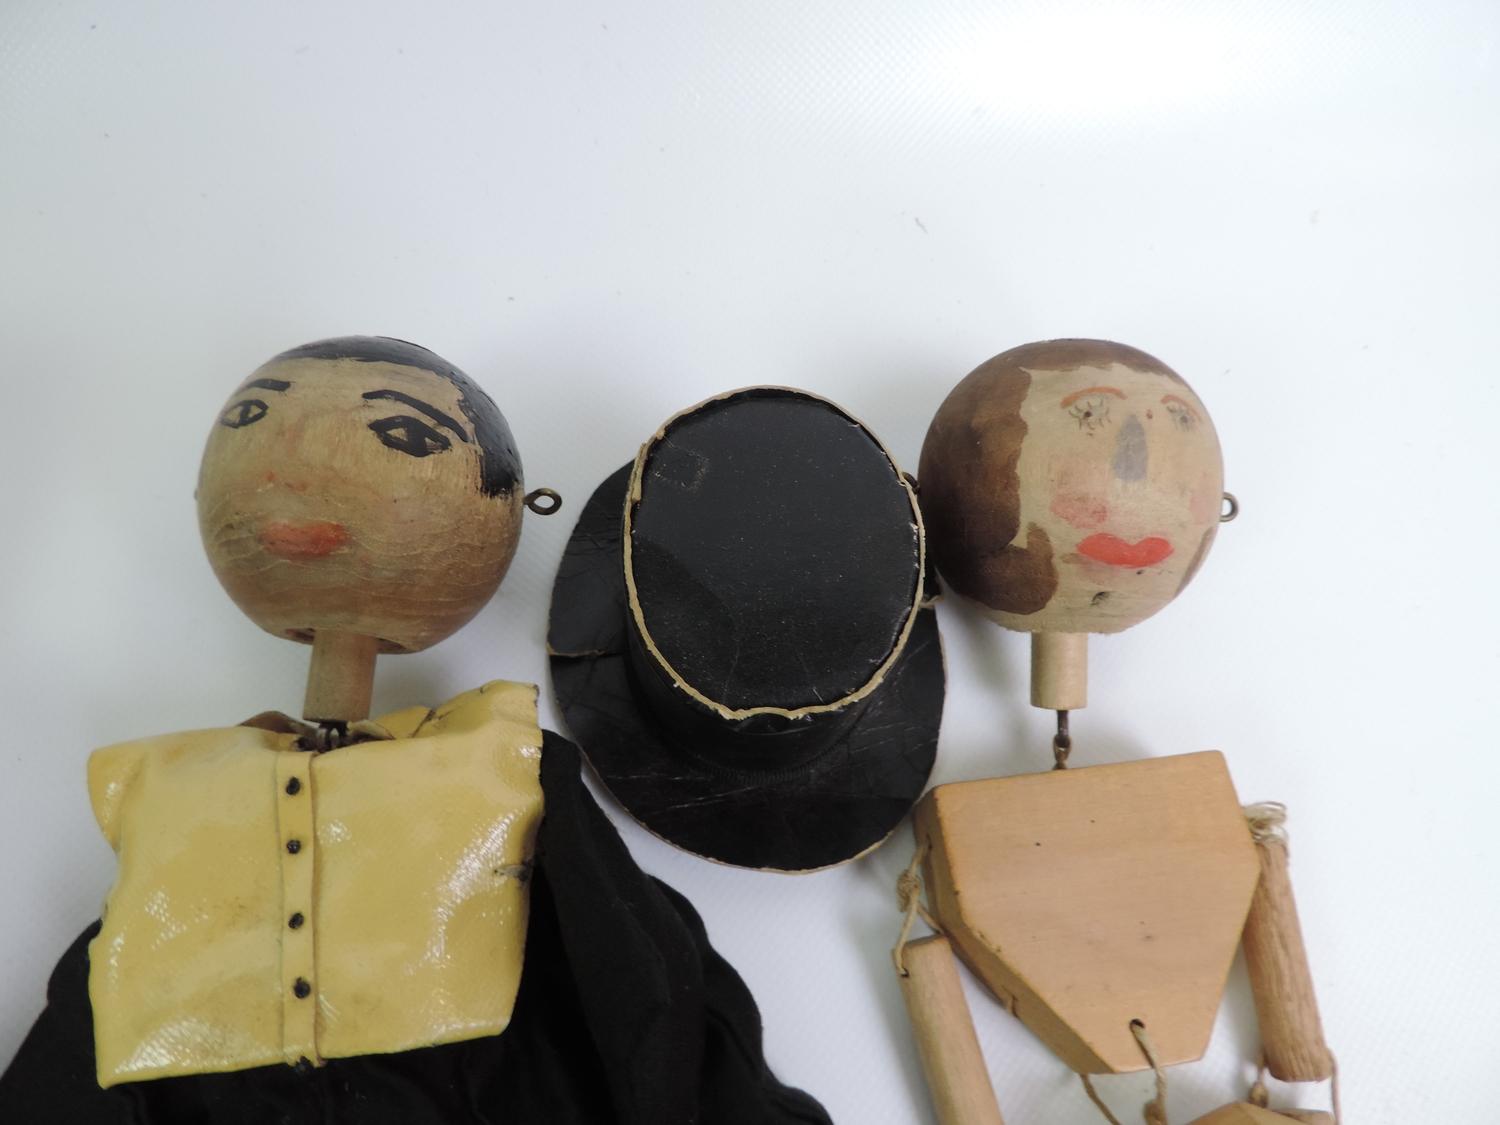 Topsy Turvy Doll, Wooden Puppets and Alsace Doll - Image 4 of 5